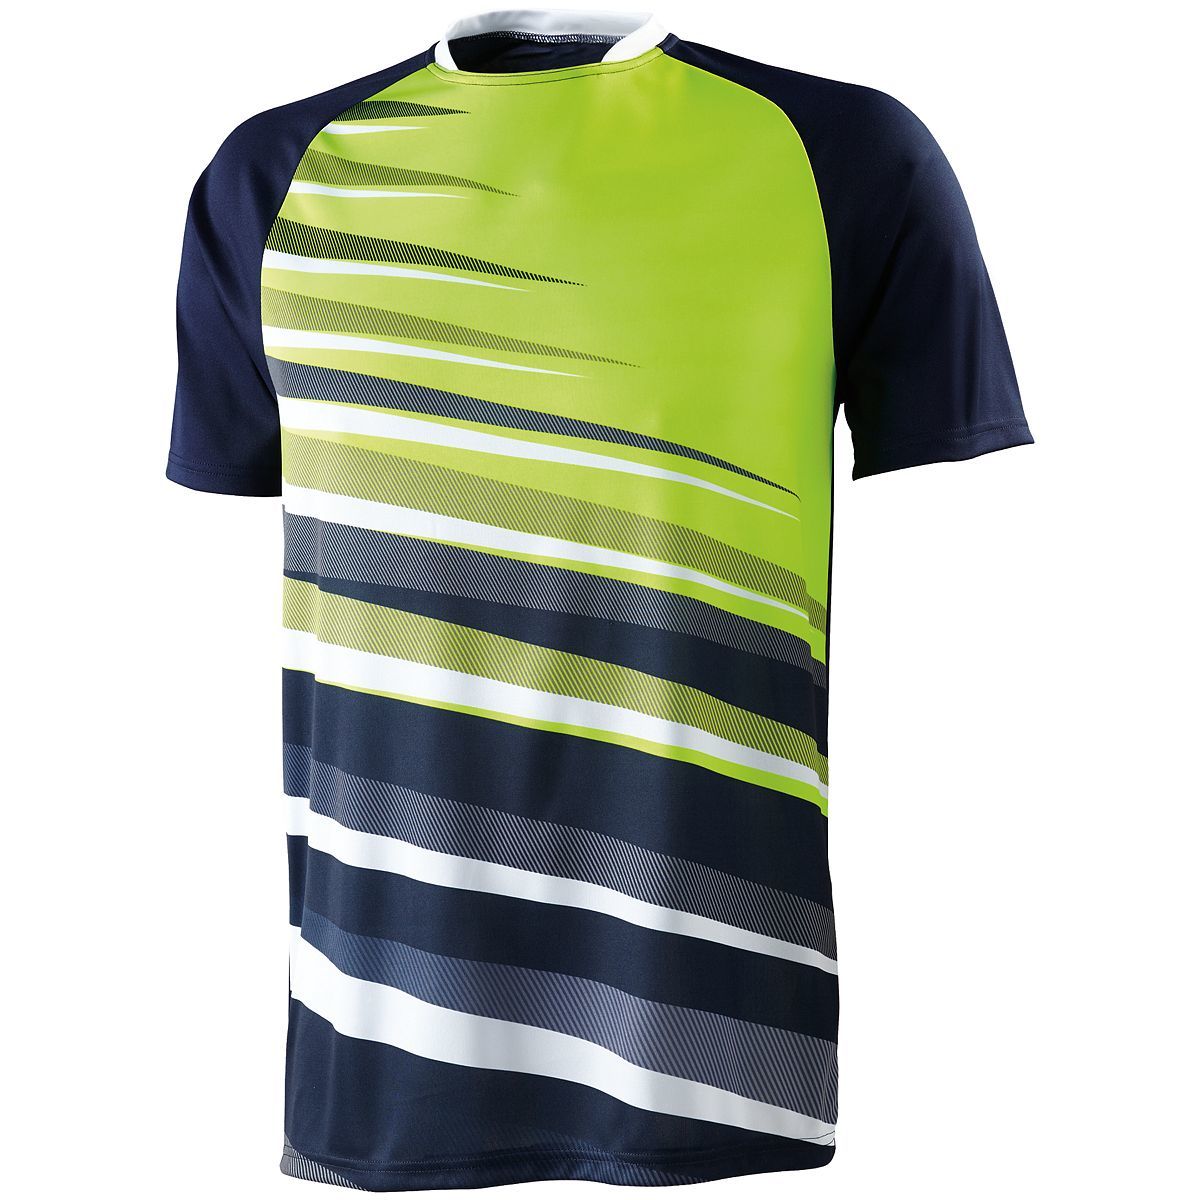 High 5 Youth Galactic Jersey in Navy/White/Lime  -Part of the Youth, Youth-Jersey, High5-Products, Soccer, Shirts, All-Sports-1 product lines at KanaleyCreations.com